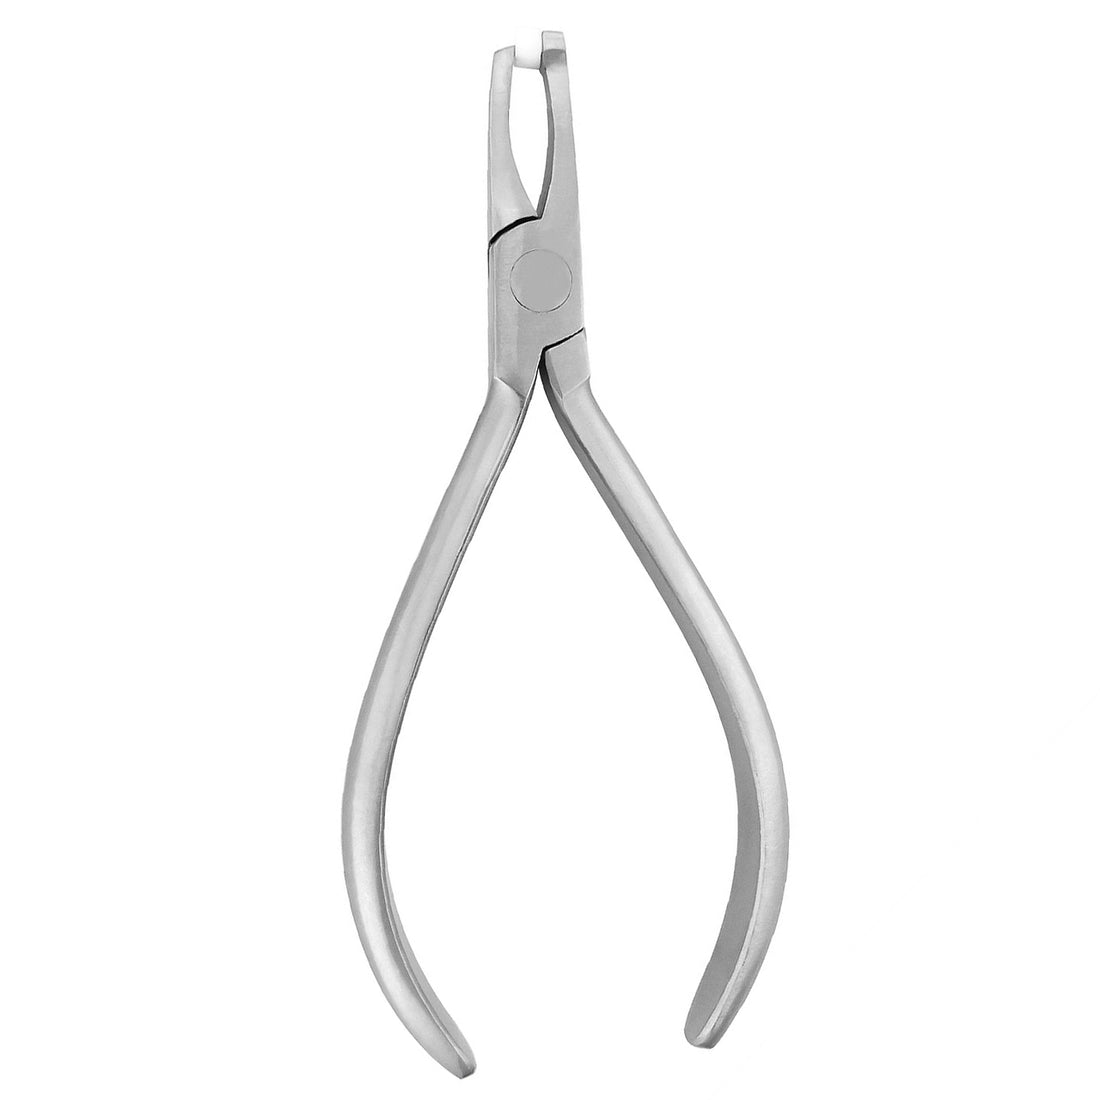 Posterior Band Removing Pliers, Short